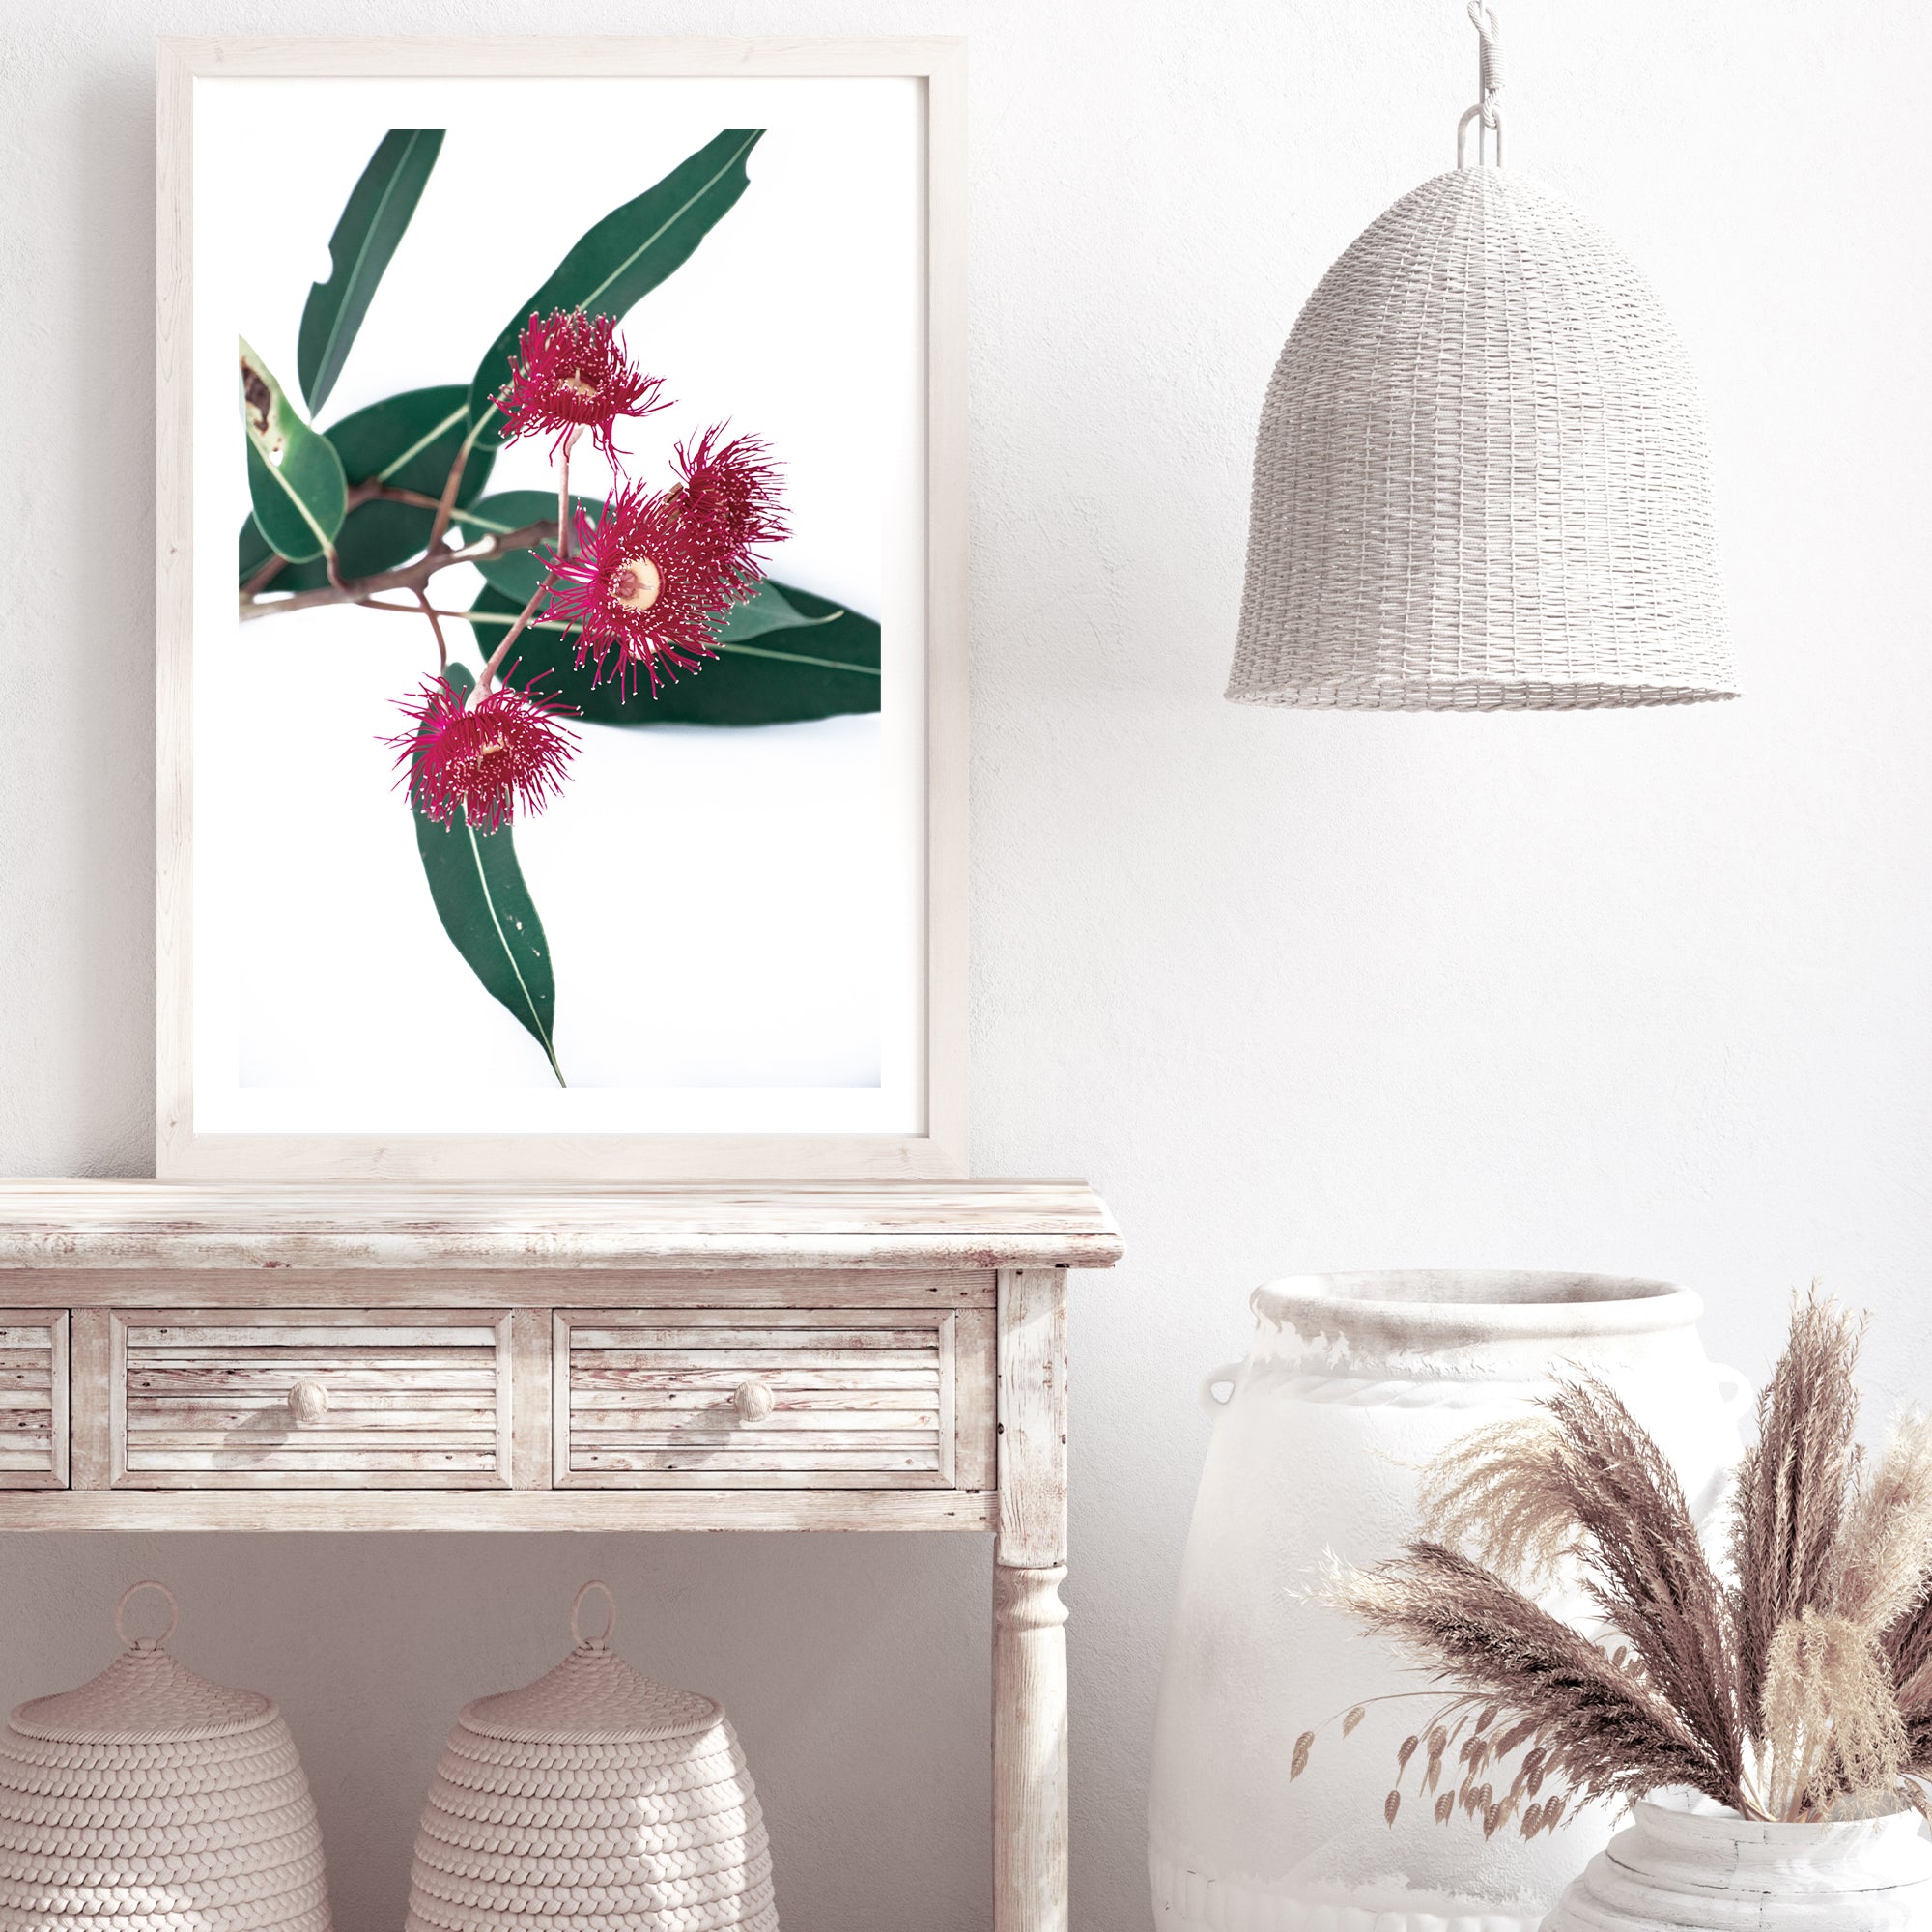 A beautiful floral artwork of green eucalyptus leaves and red wild flowers, available framed or unframed.